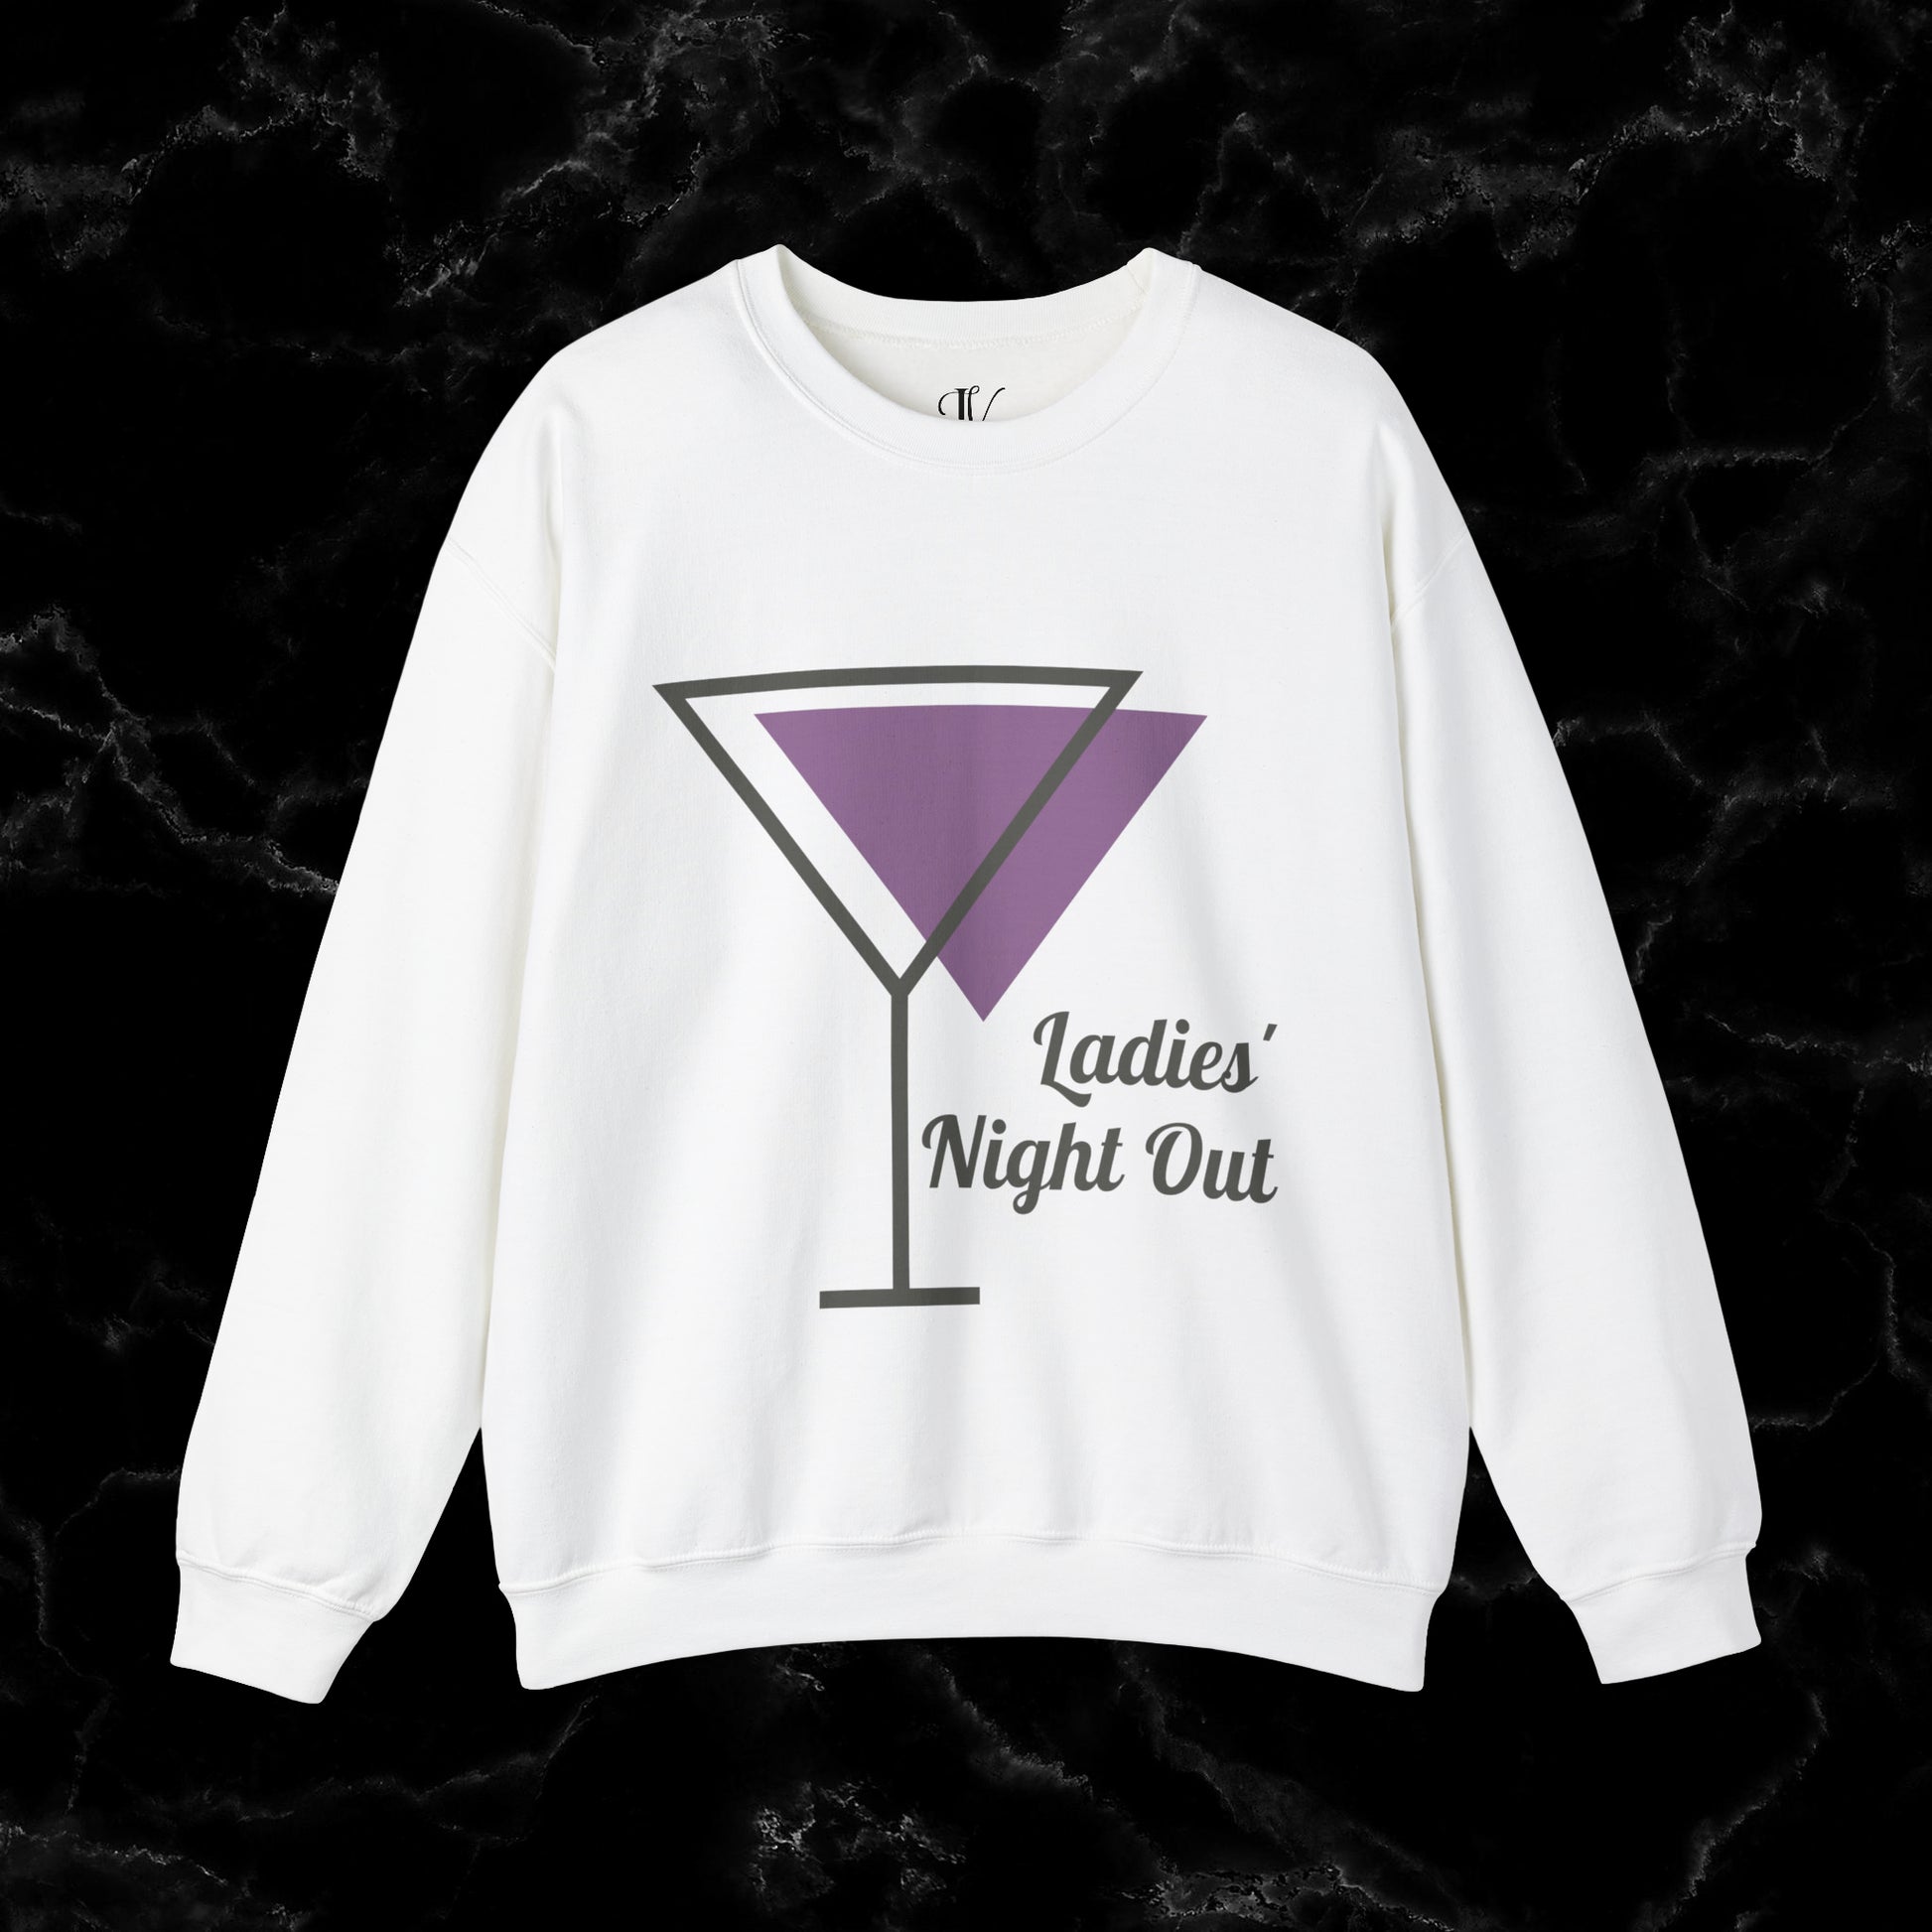 Ladies' Night Out - Dirty Martini Social Club Sweatshirt - Elevate Your Night Out with Style and Sass in this Chic and Comfortable Sweatshirt! Sweatshirt S White 